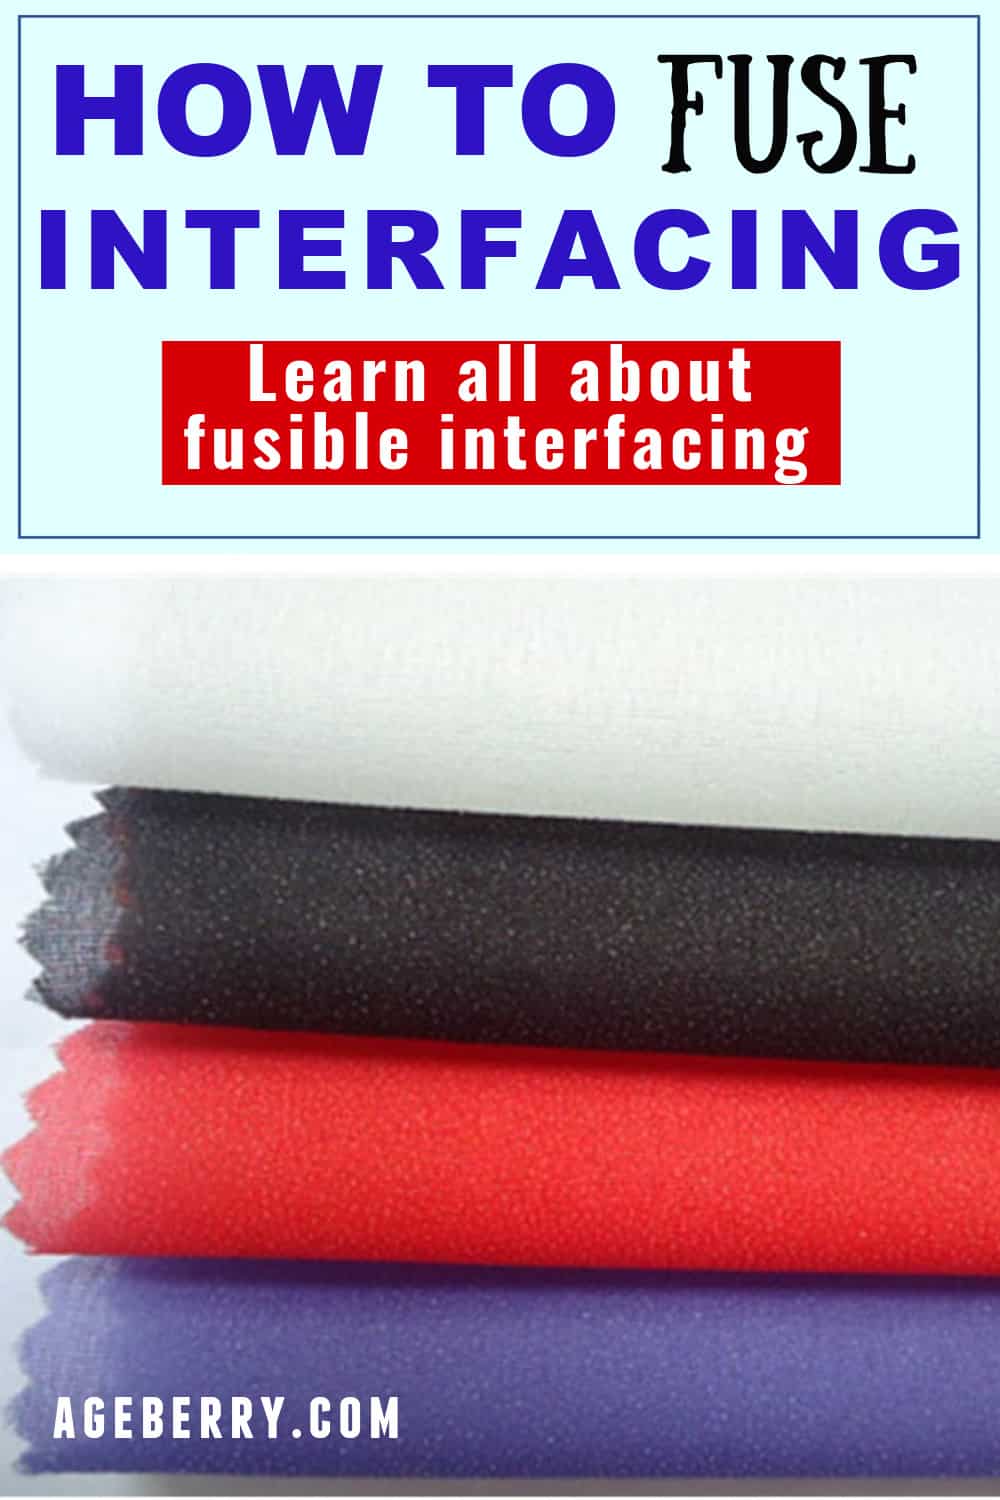 How to use fusible interfacing